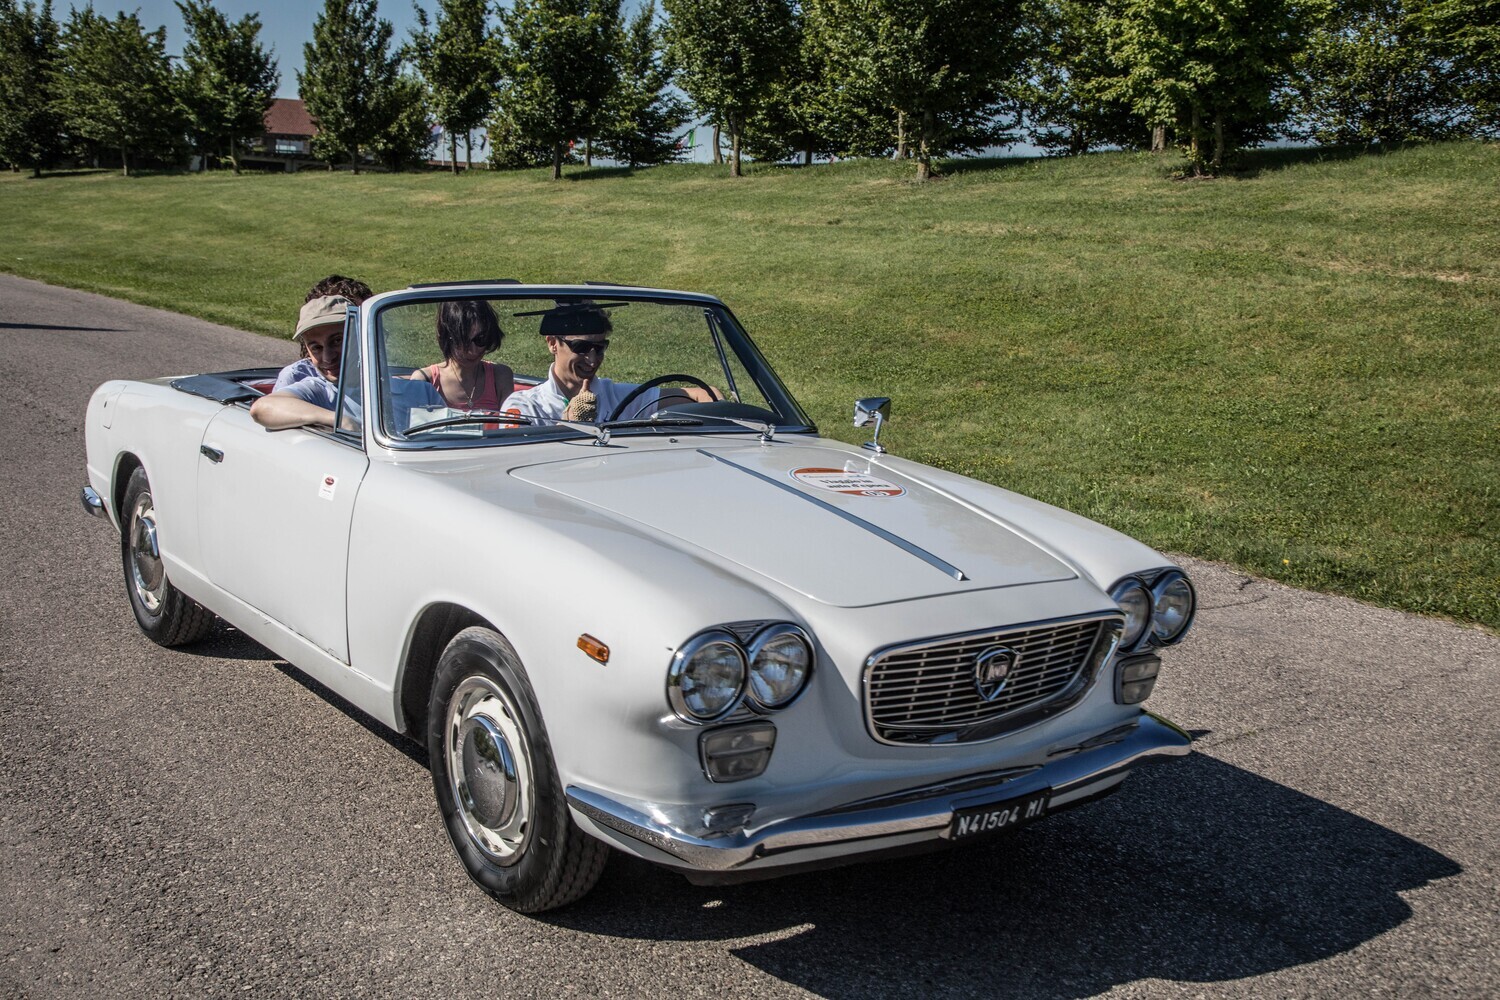 ONE DAY DRIVING A VINTAGE CAR IN TUSCANY - PREMIUM